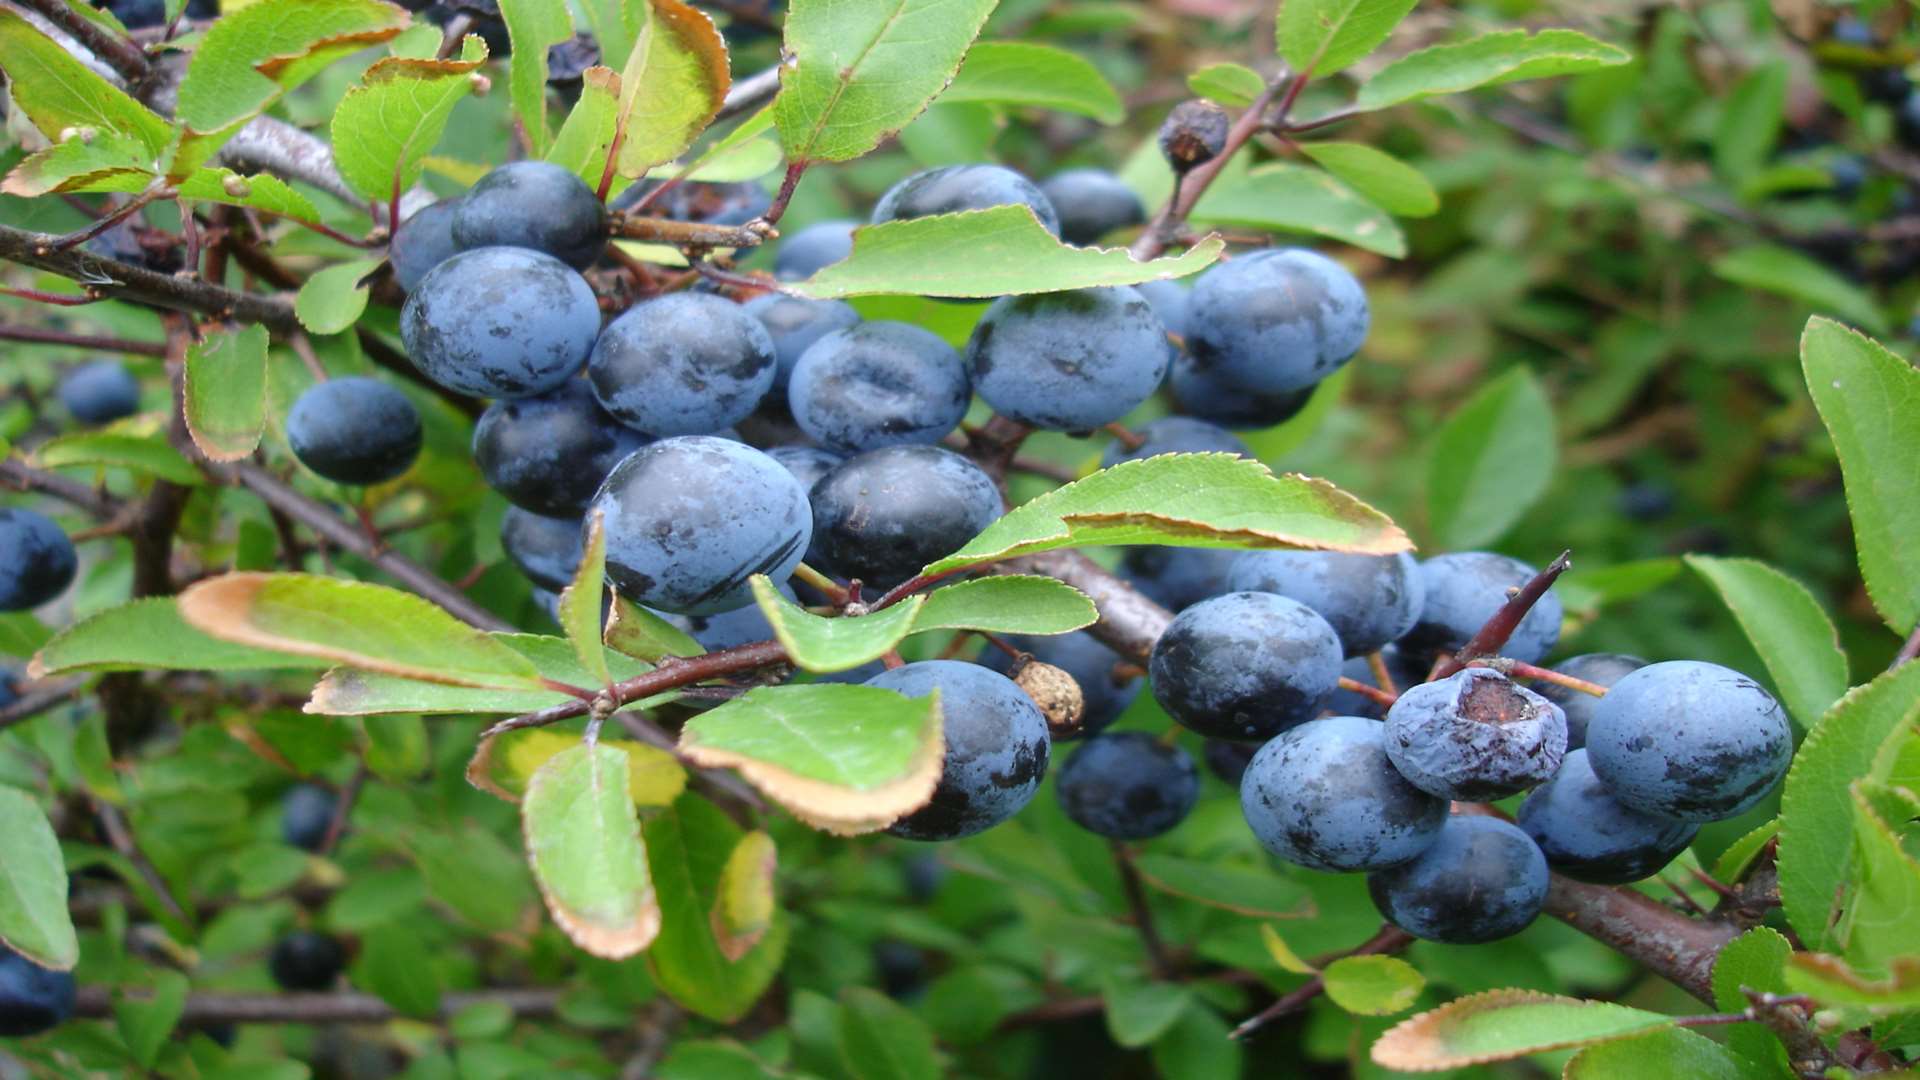 Sloe berries are used to make the gin. Stock picture